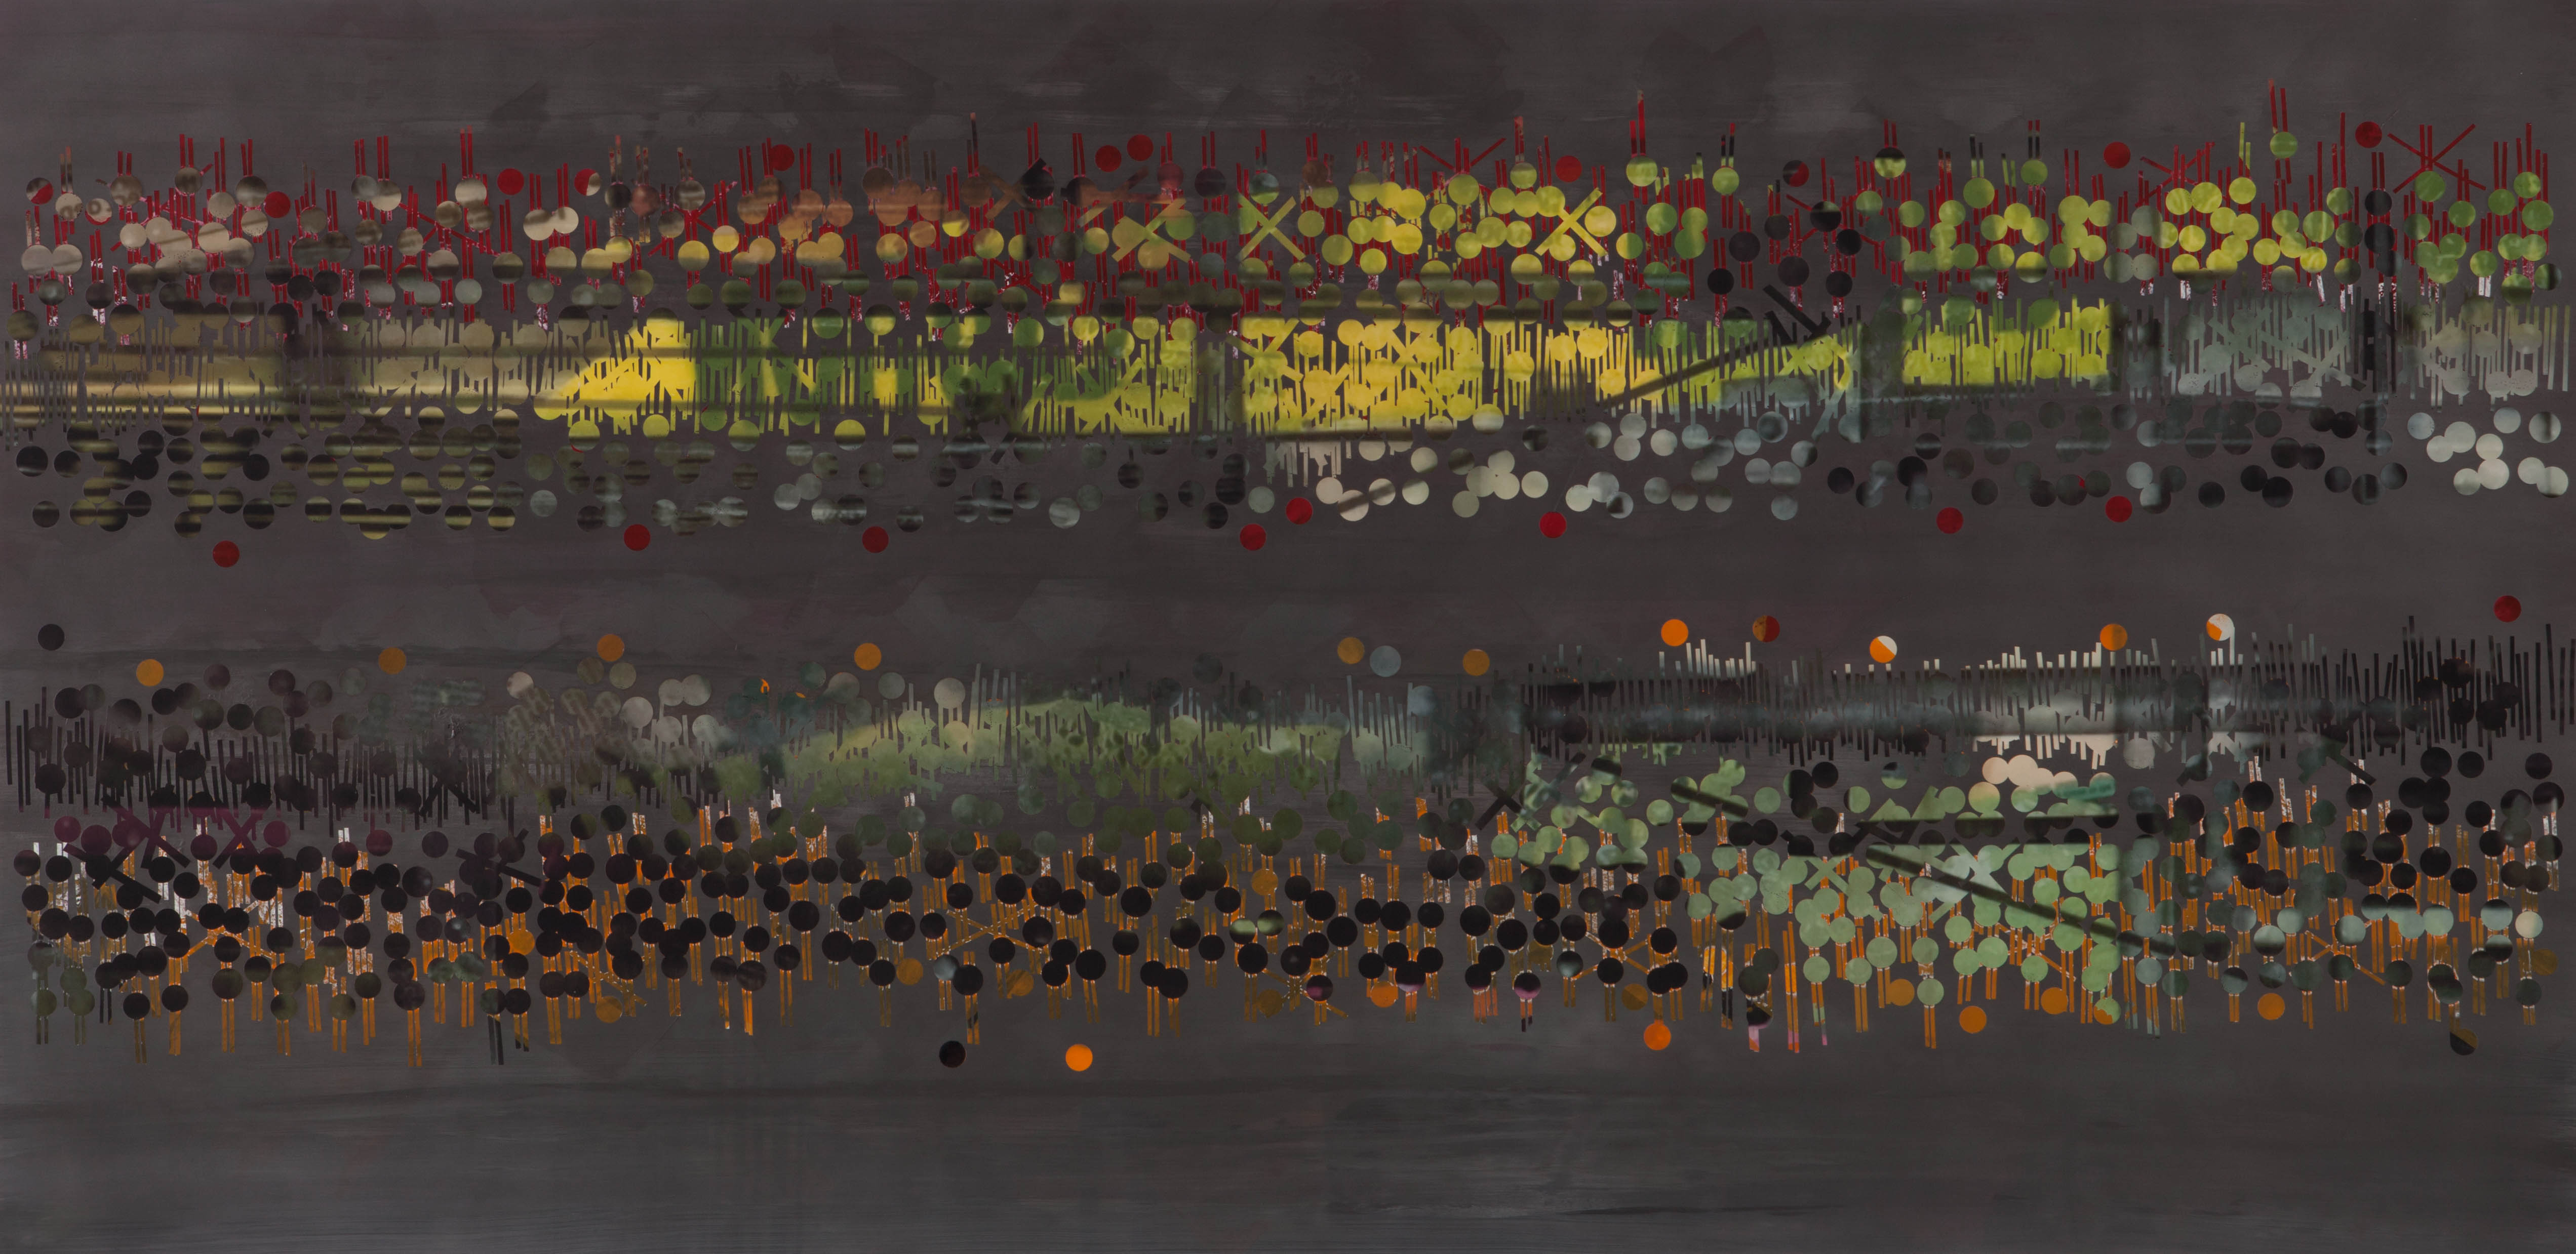 TRIBE 176 - 2013, acrylic, watercolor, graphite on paper, 35.5 x 72 inches (SOLD)